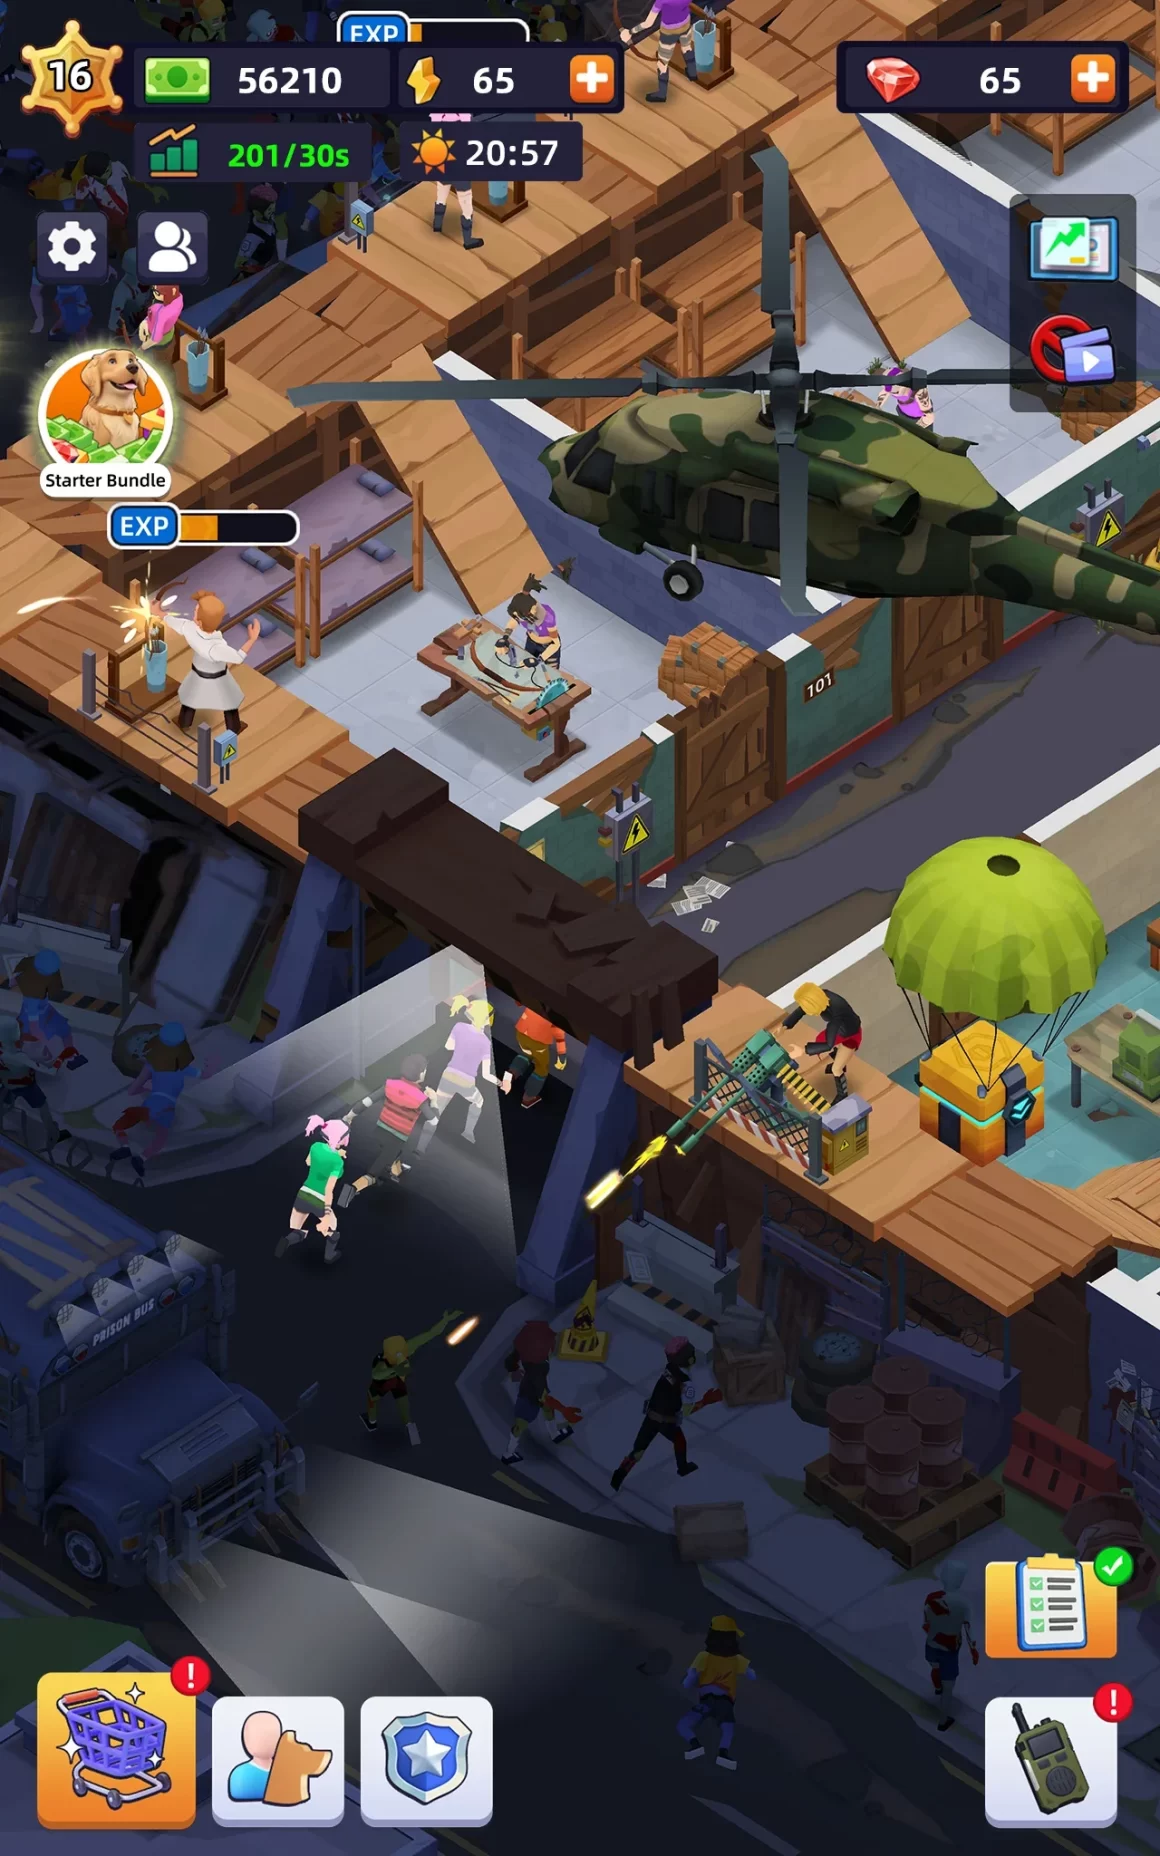 unnamed 26 6 1160x1856 - Idle Survivor Fortress Tycoon Mod Apk V1.4.1 (Unlimited Money)